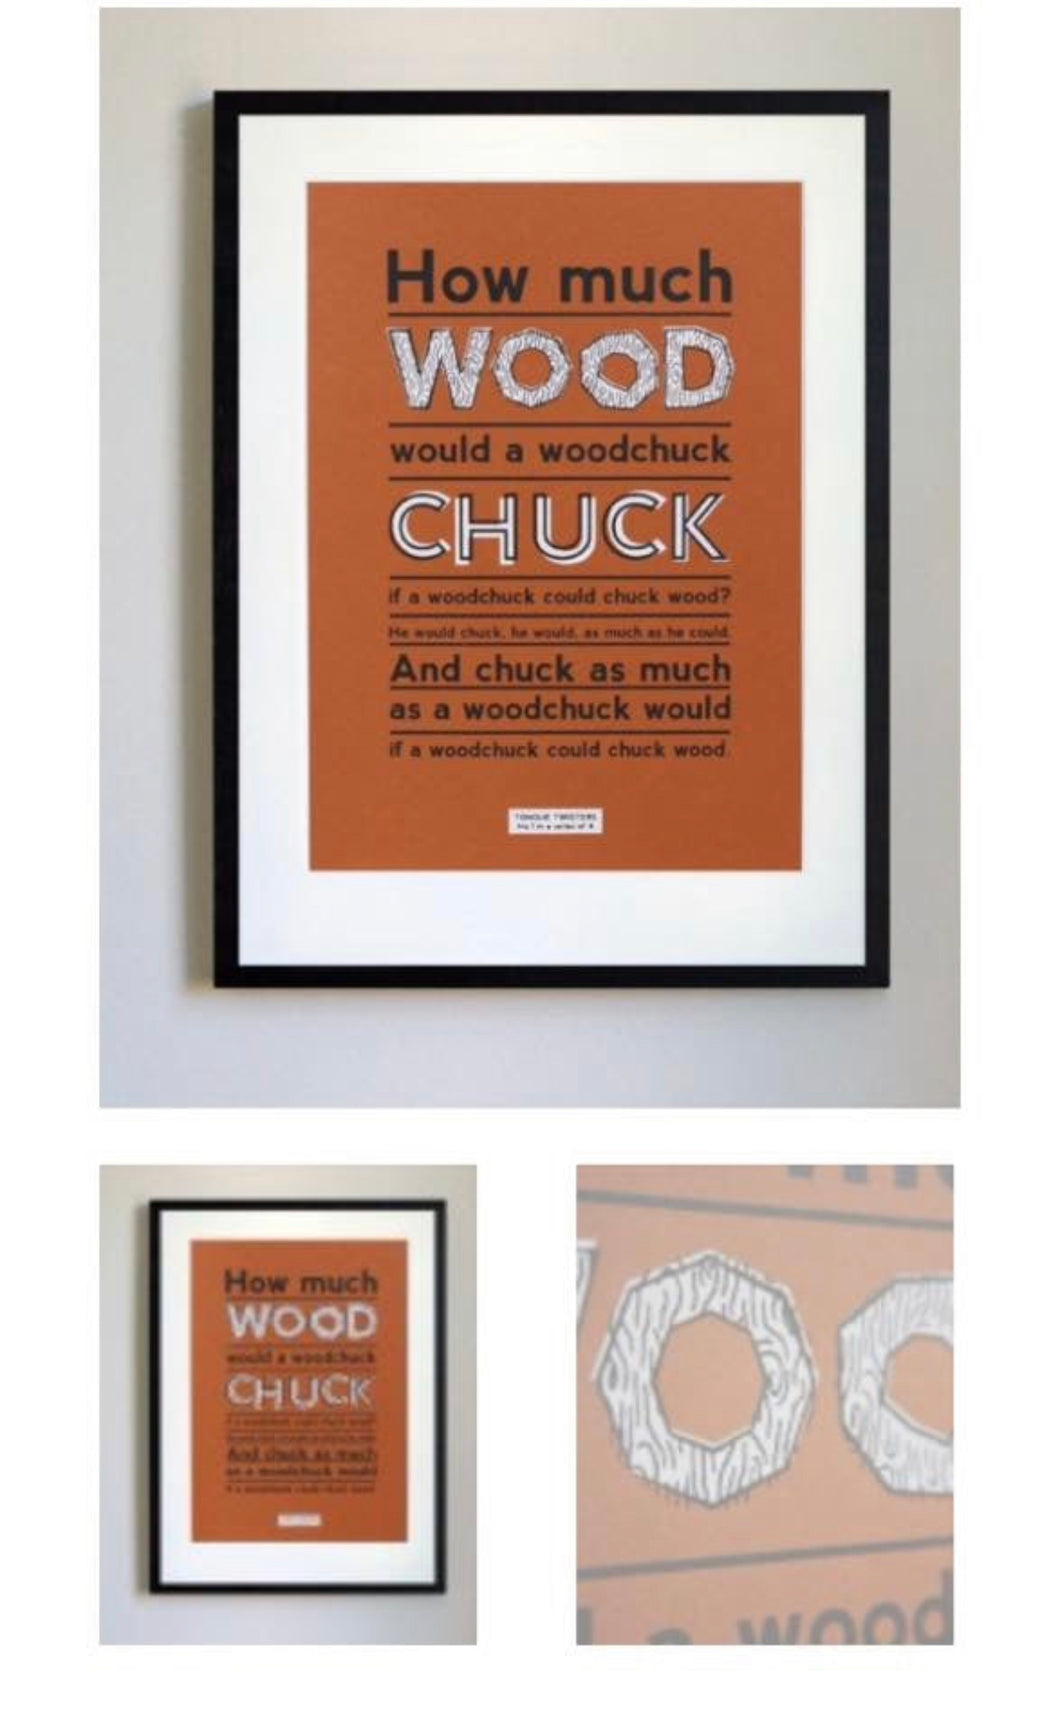 How much wood would a wood chuck…